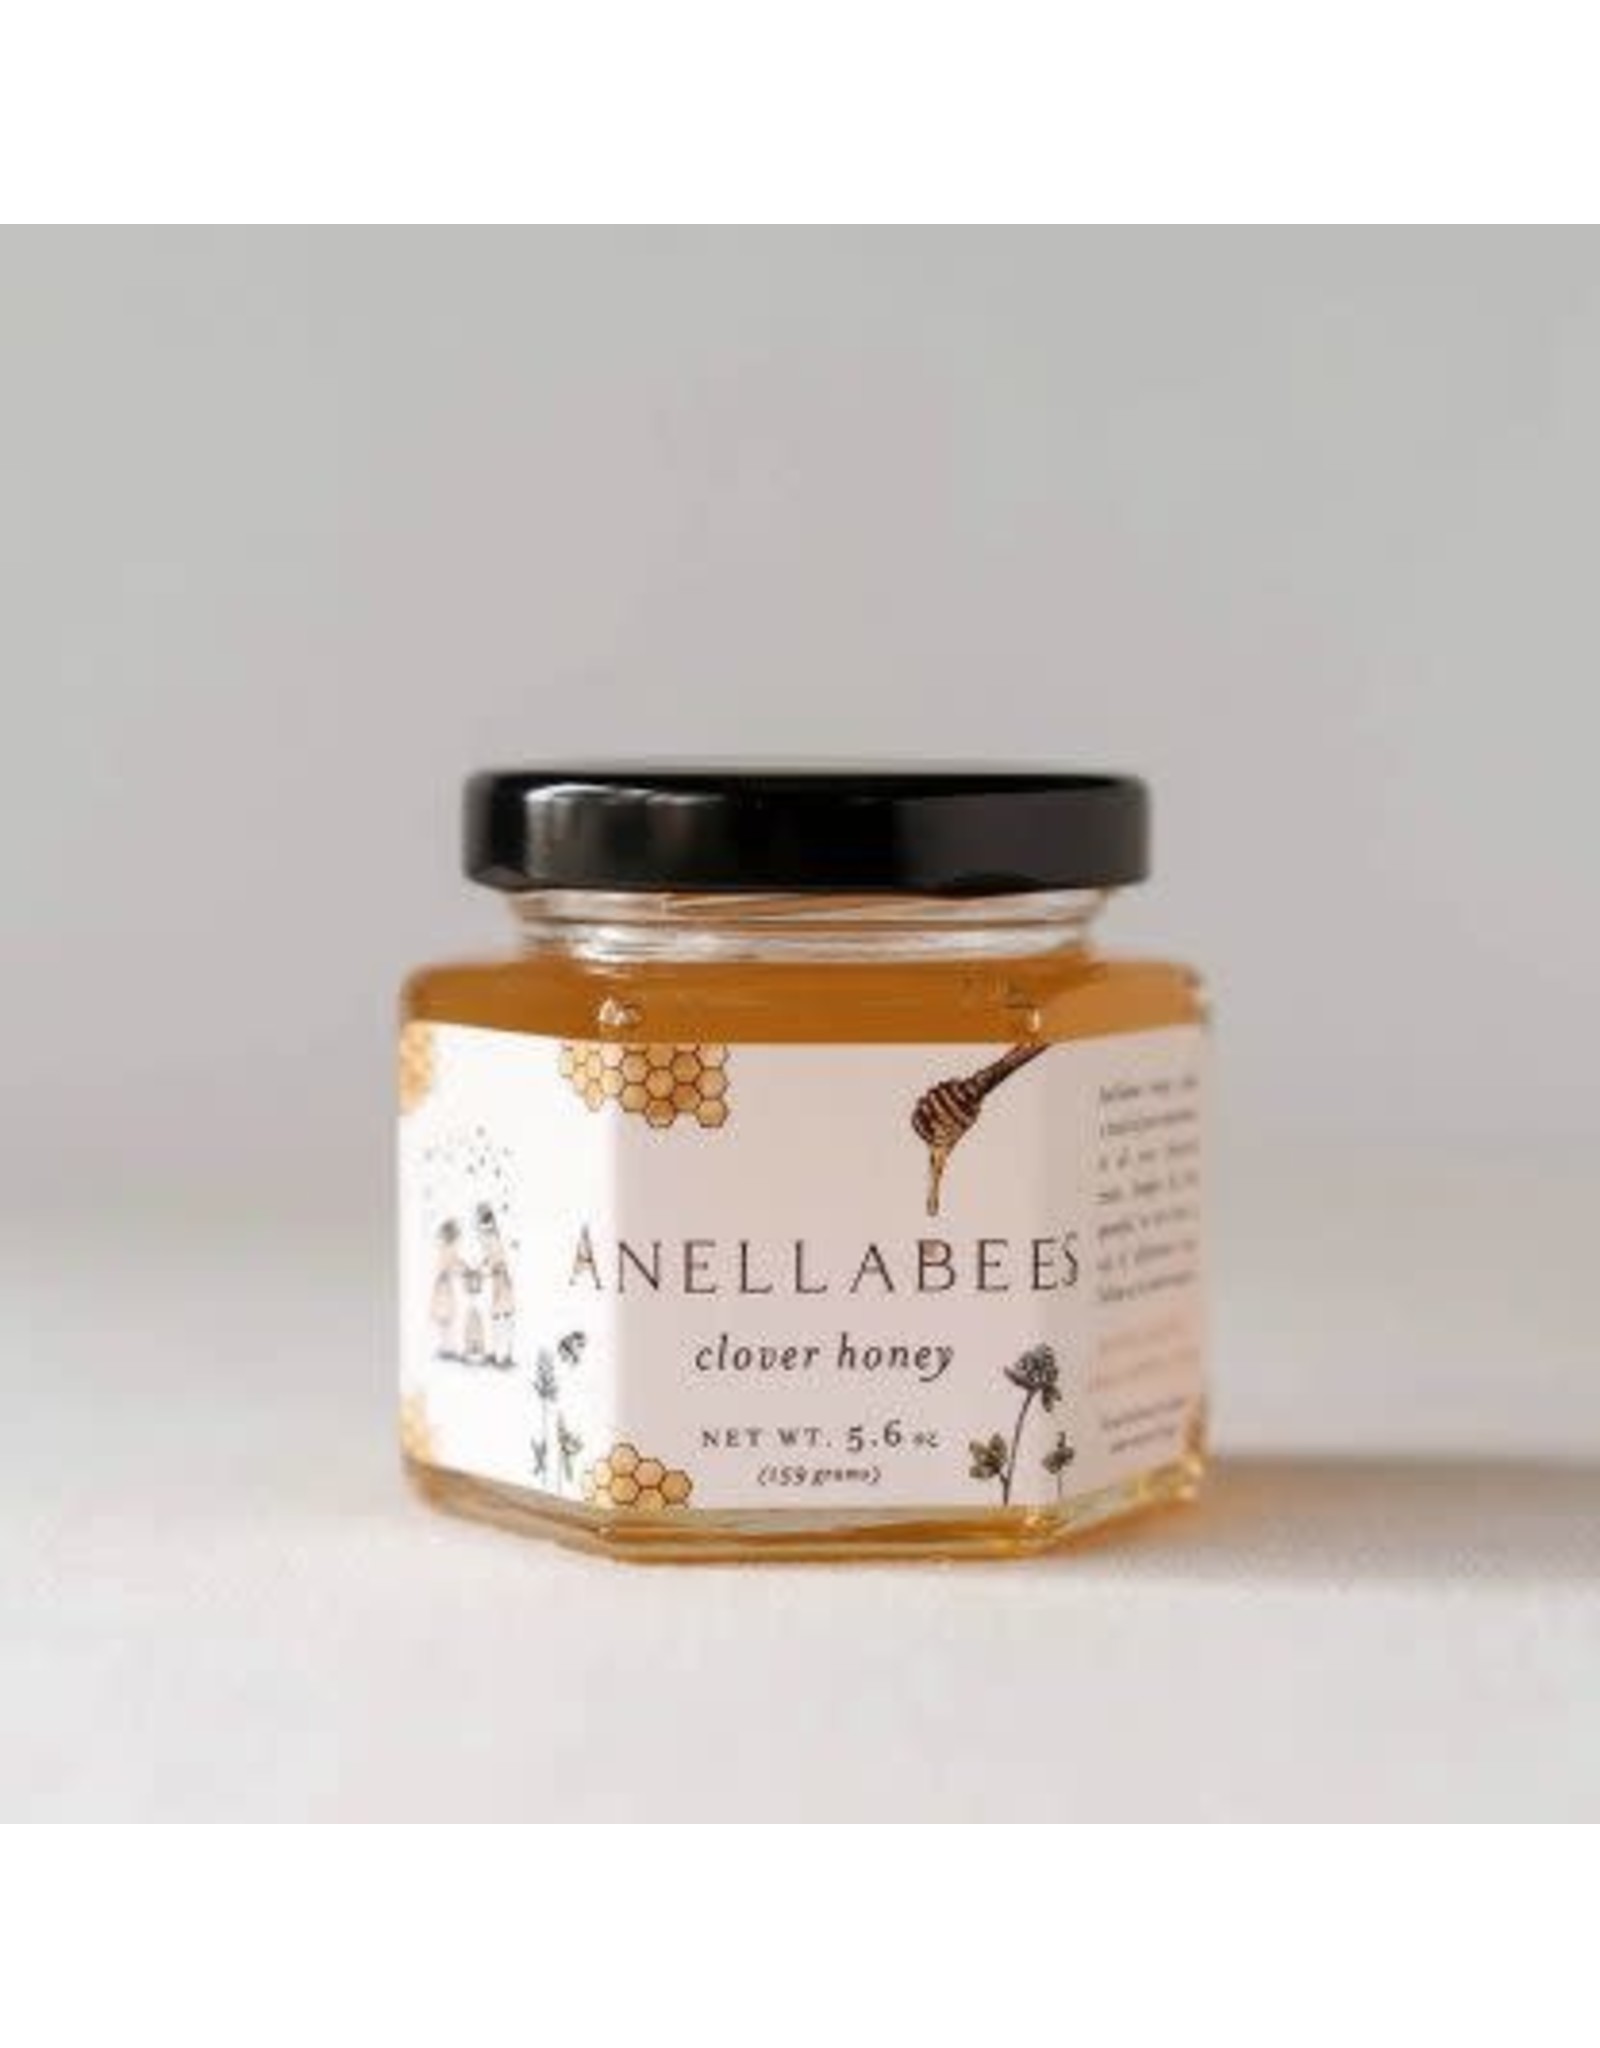 Anellabees Raw Clover Honey